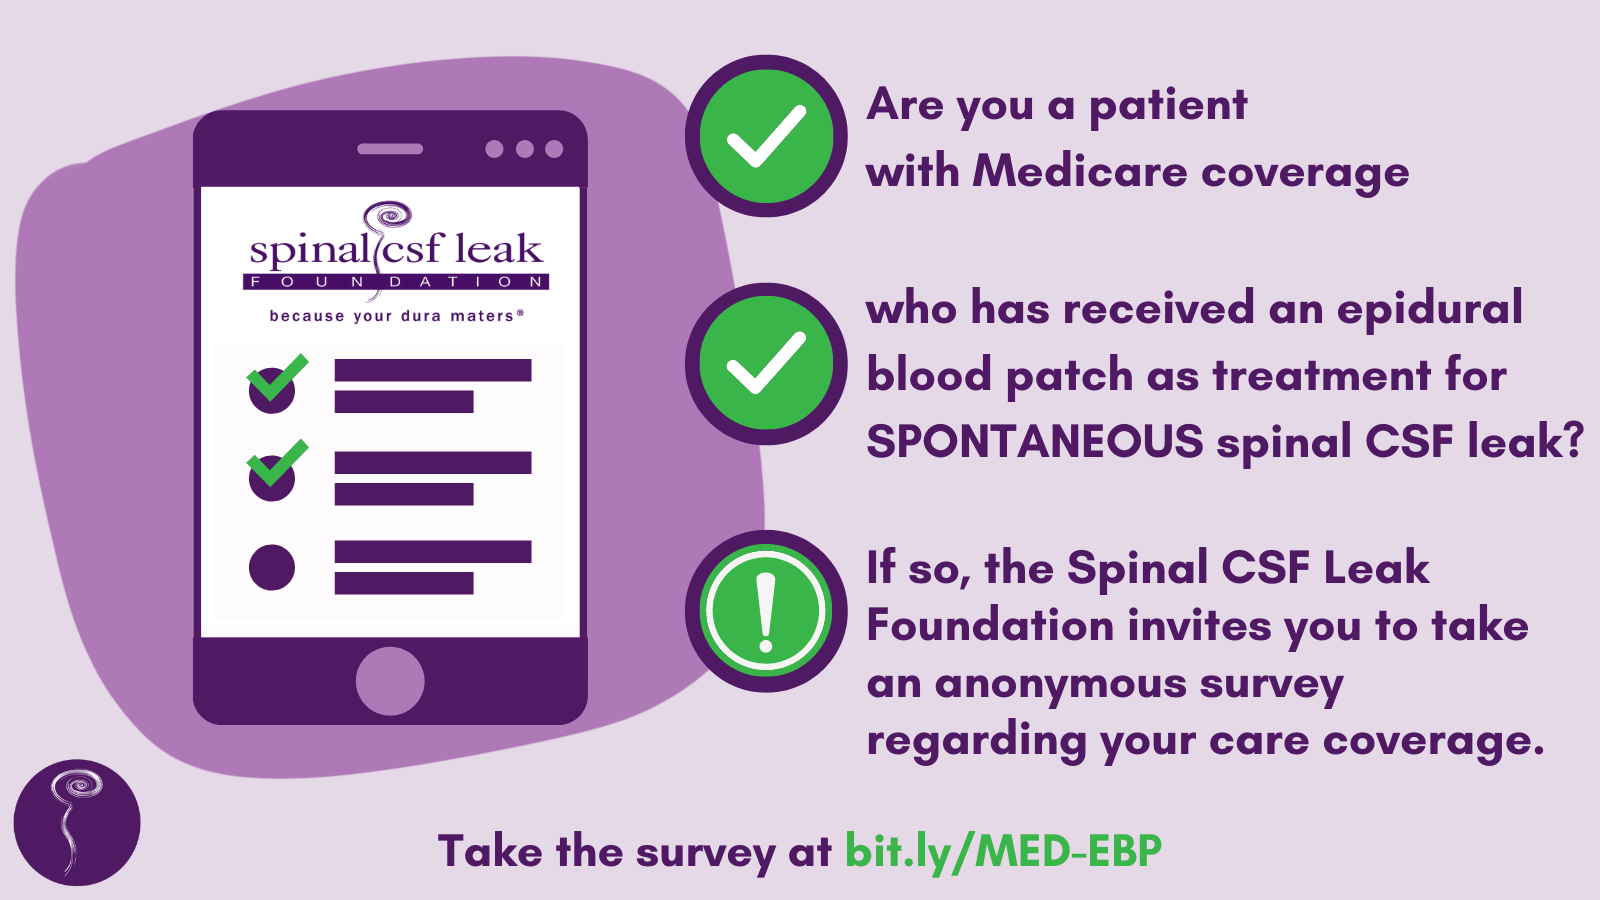 graphic inviting patients with spontaneous spinal csf leak who have medicare coverage and have been treated with an epidural blood patch to take our anonymous survey.